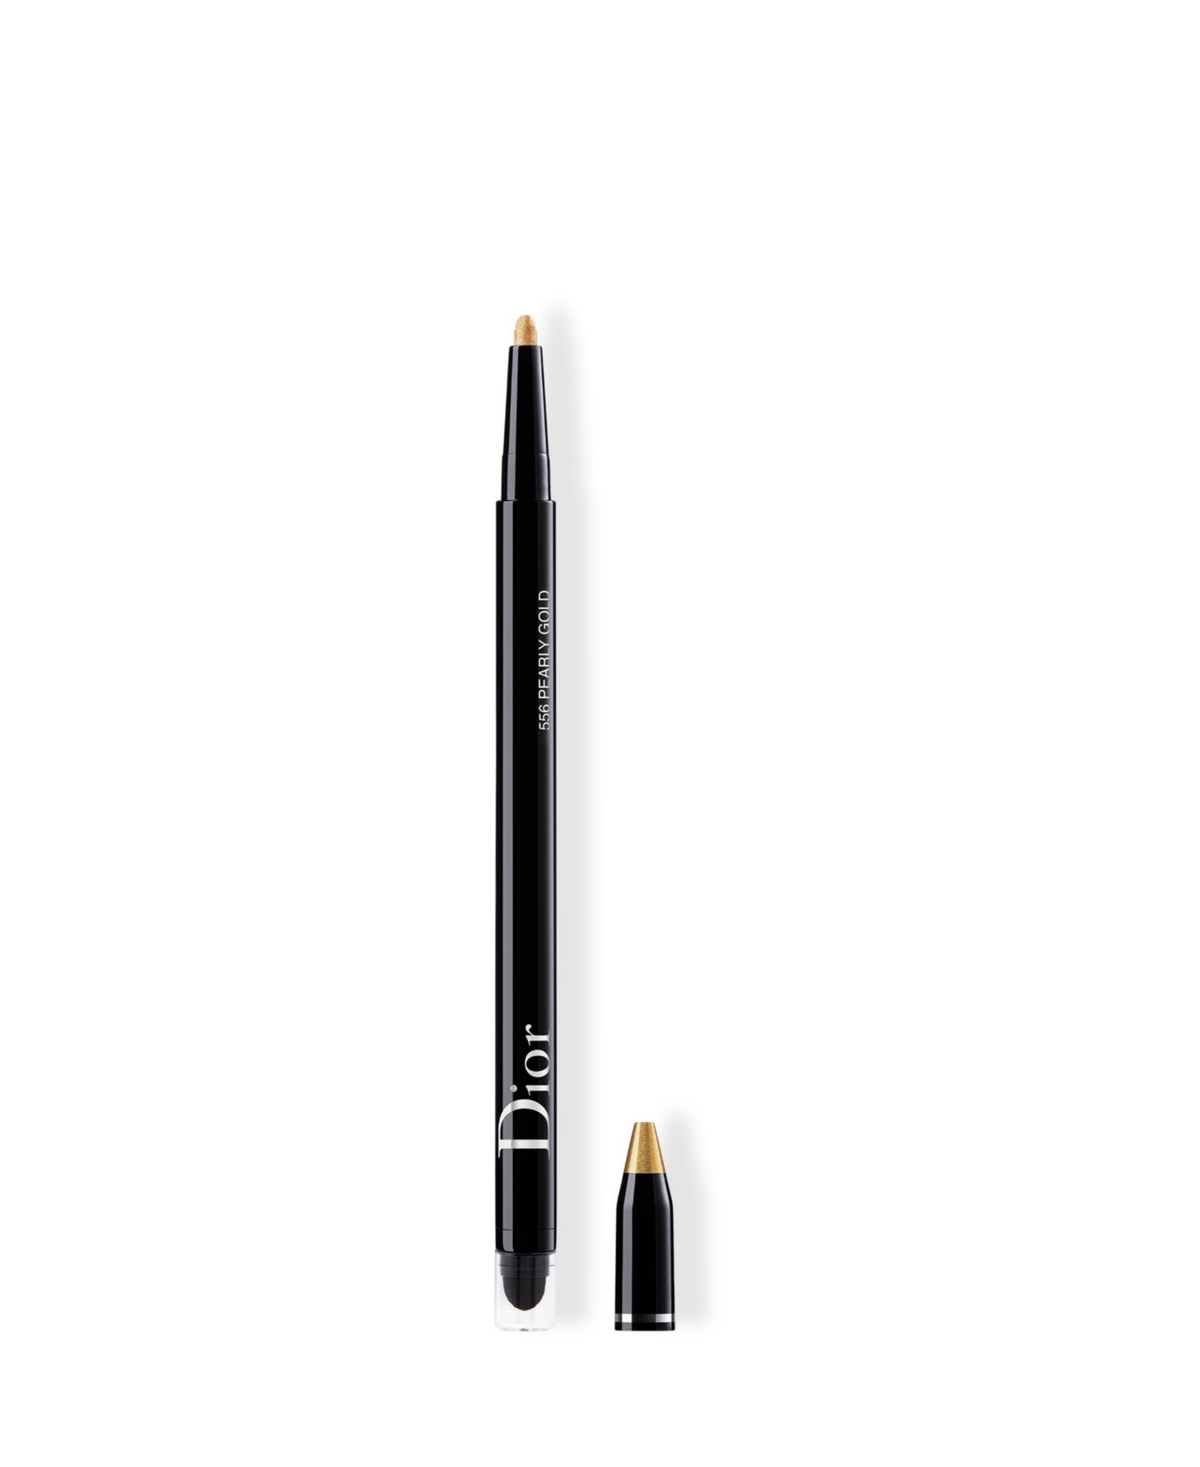 Dior Show 24h Stylo Waterproof Eyeliner In Pearly Gold